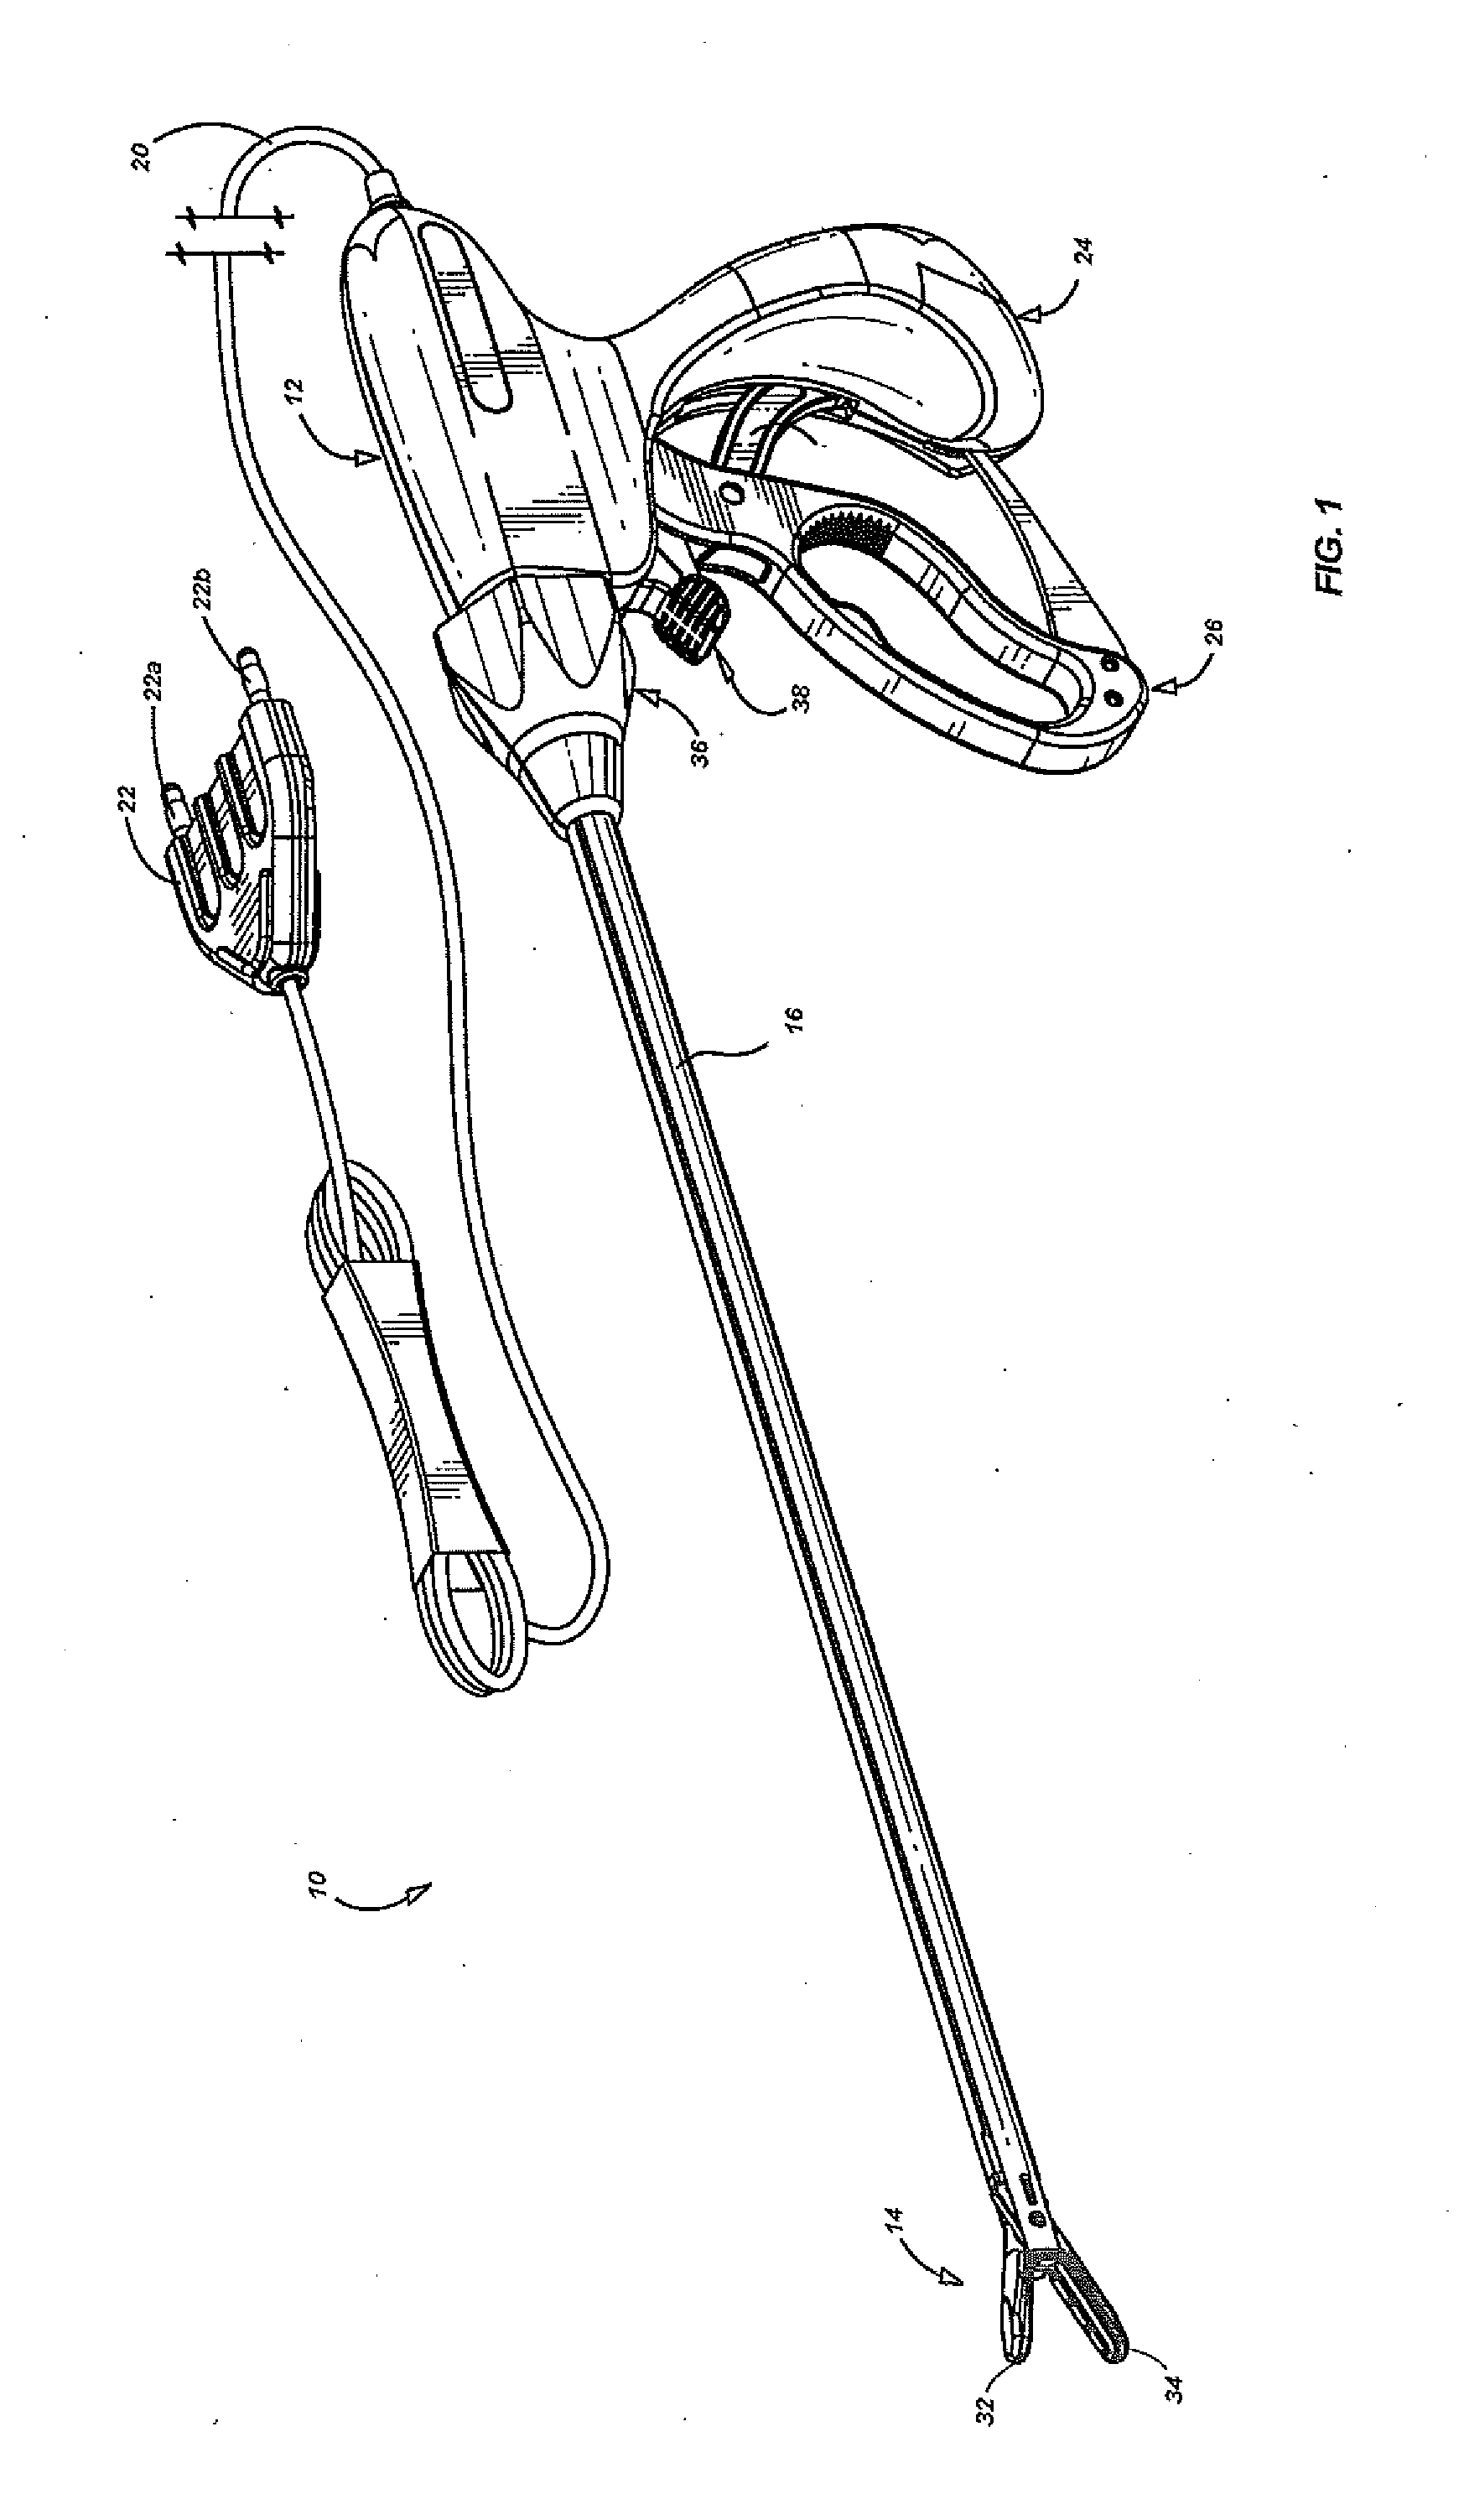 Pinion Blade Drive Mechanism for a Laparoscopic Vessel Dissector